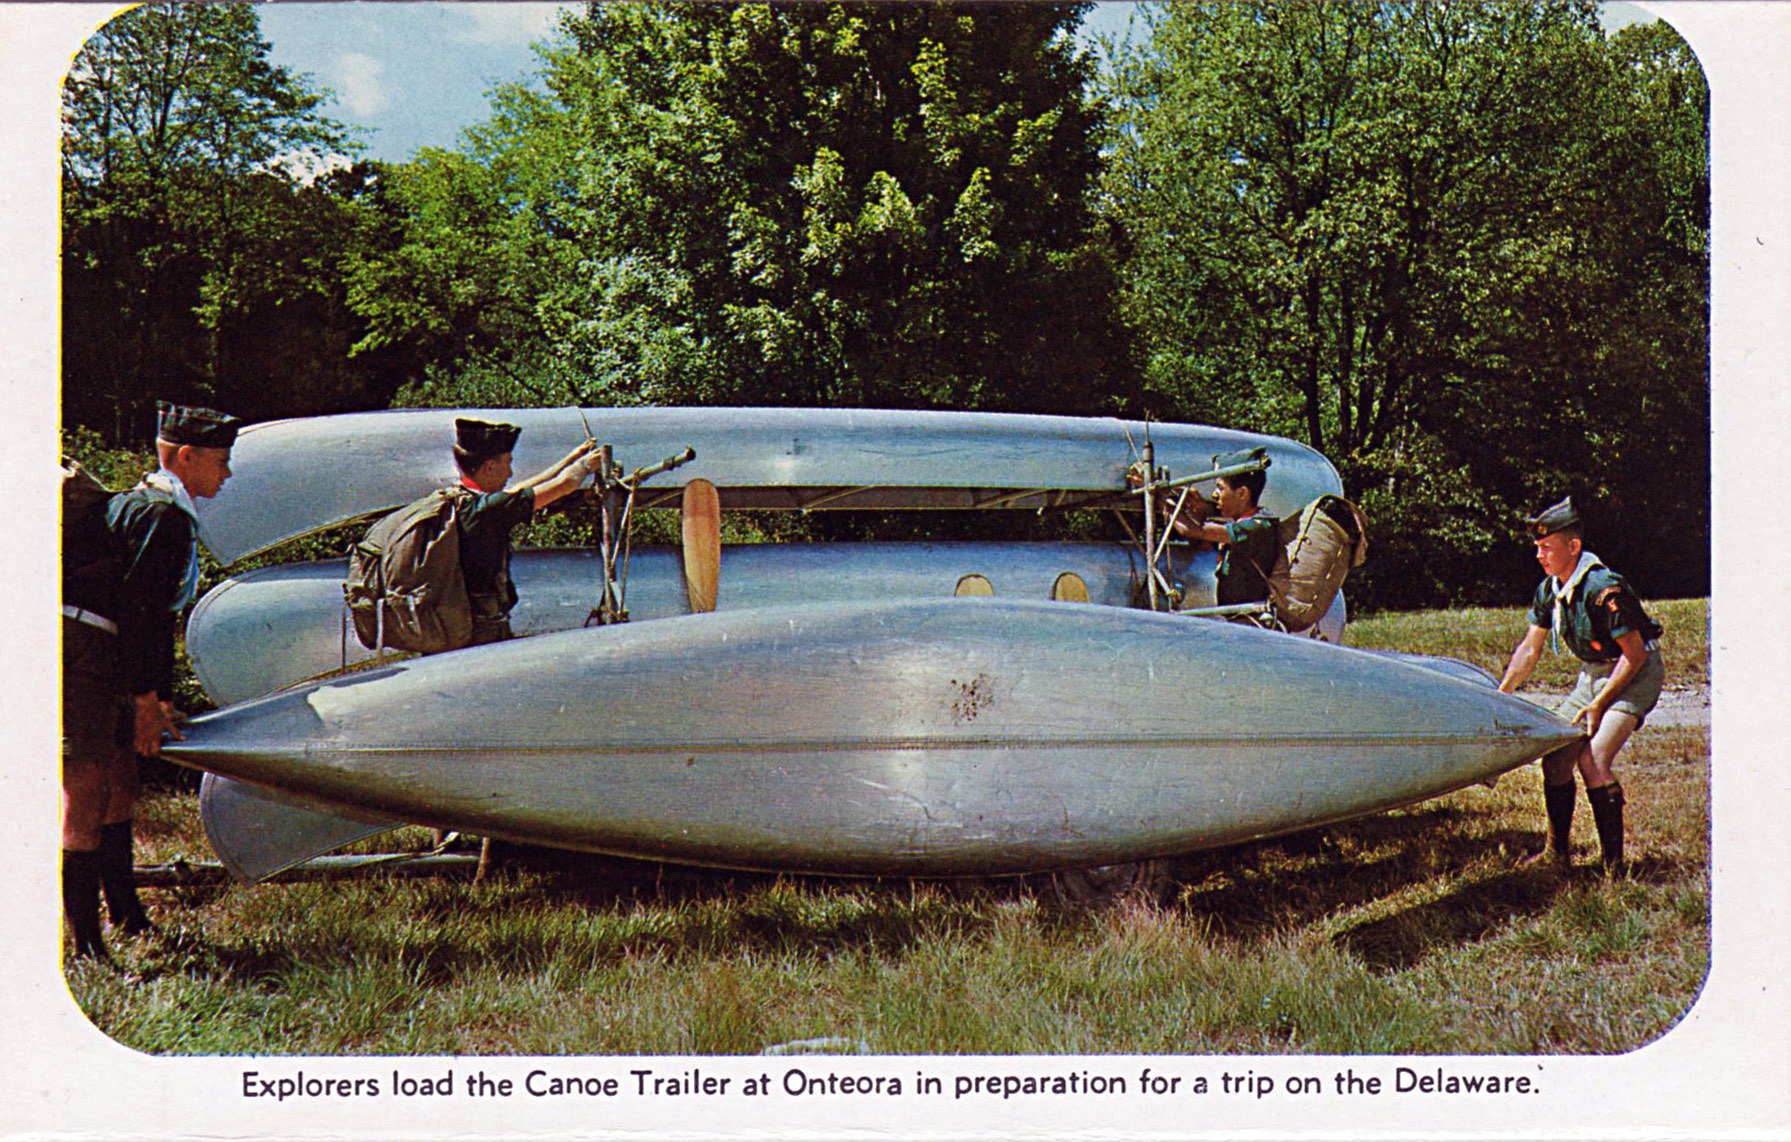 Explorers load the Canoe Trailer at Onteora in preparation for a trip on the Delaware